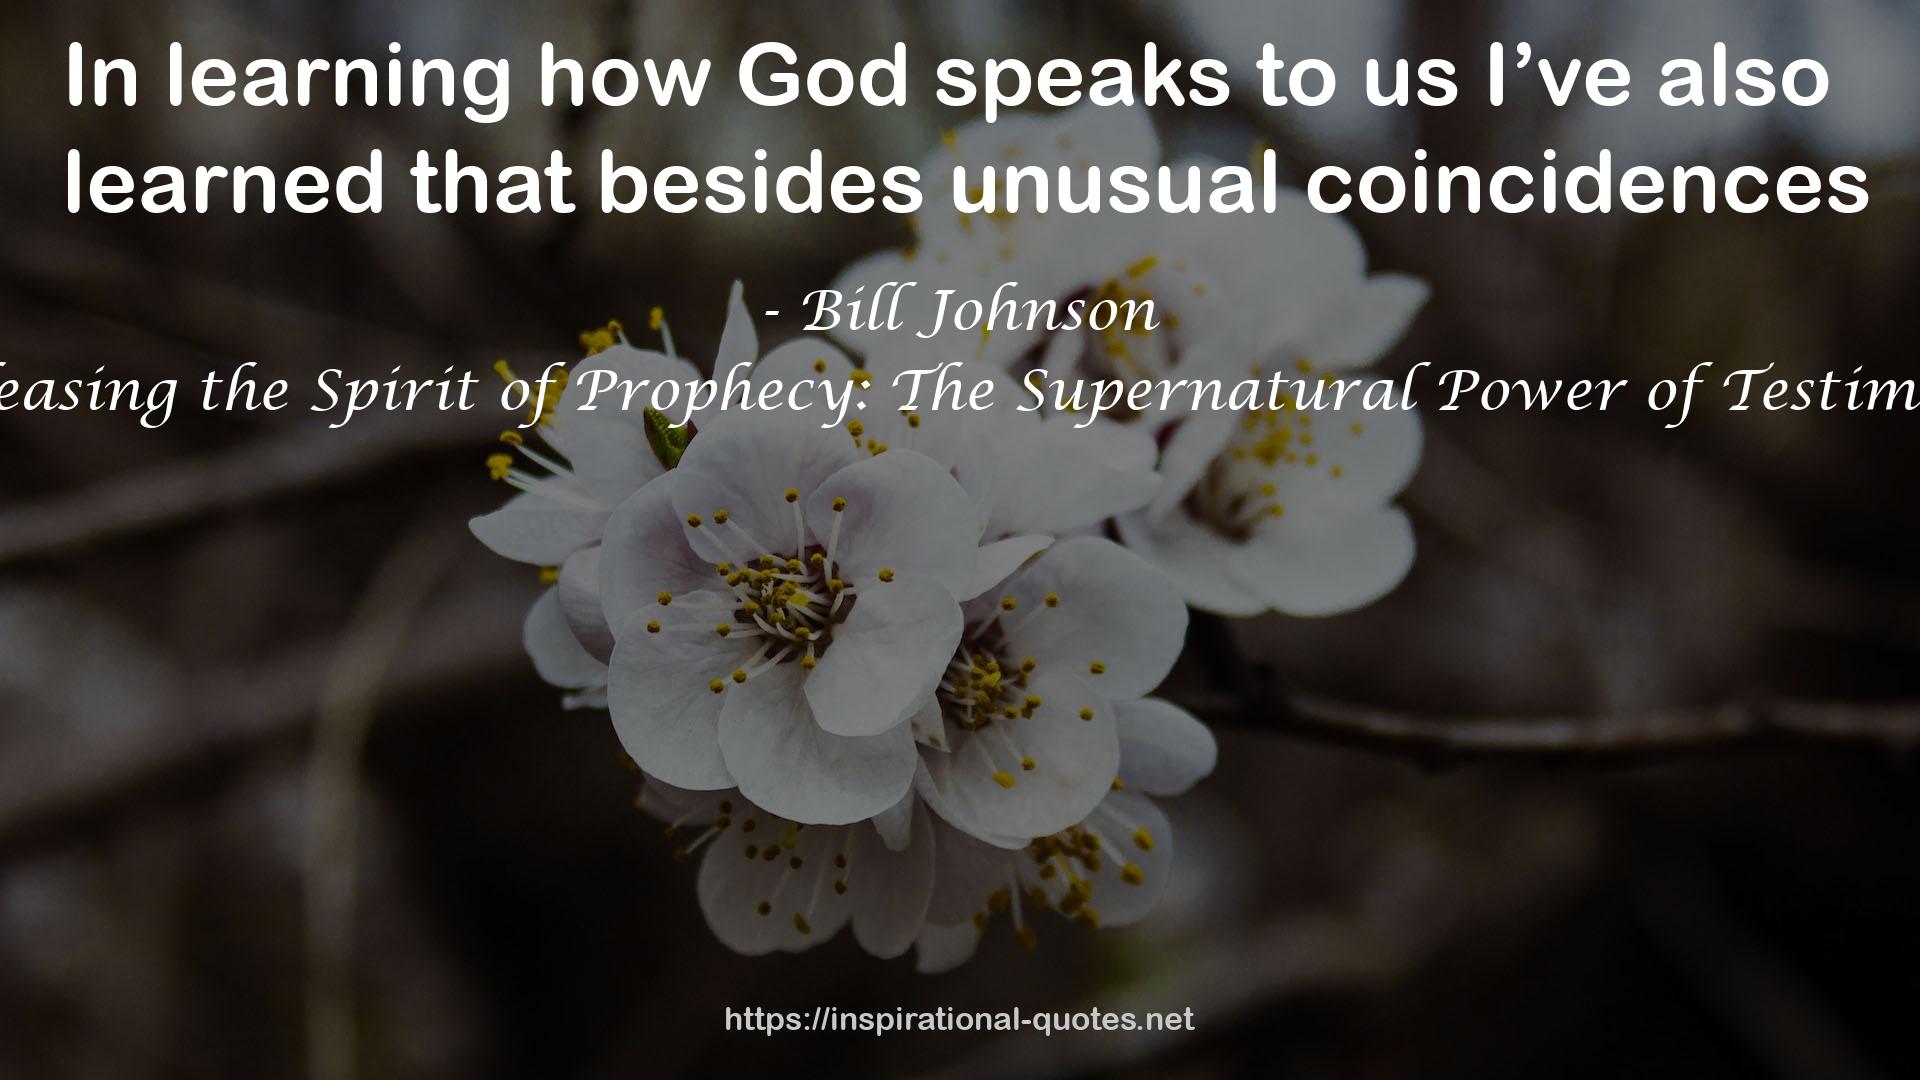 Releasing the Spirit of Prophecy: The Supernatural Power of Testimony QUOTES